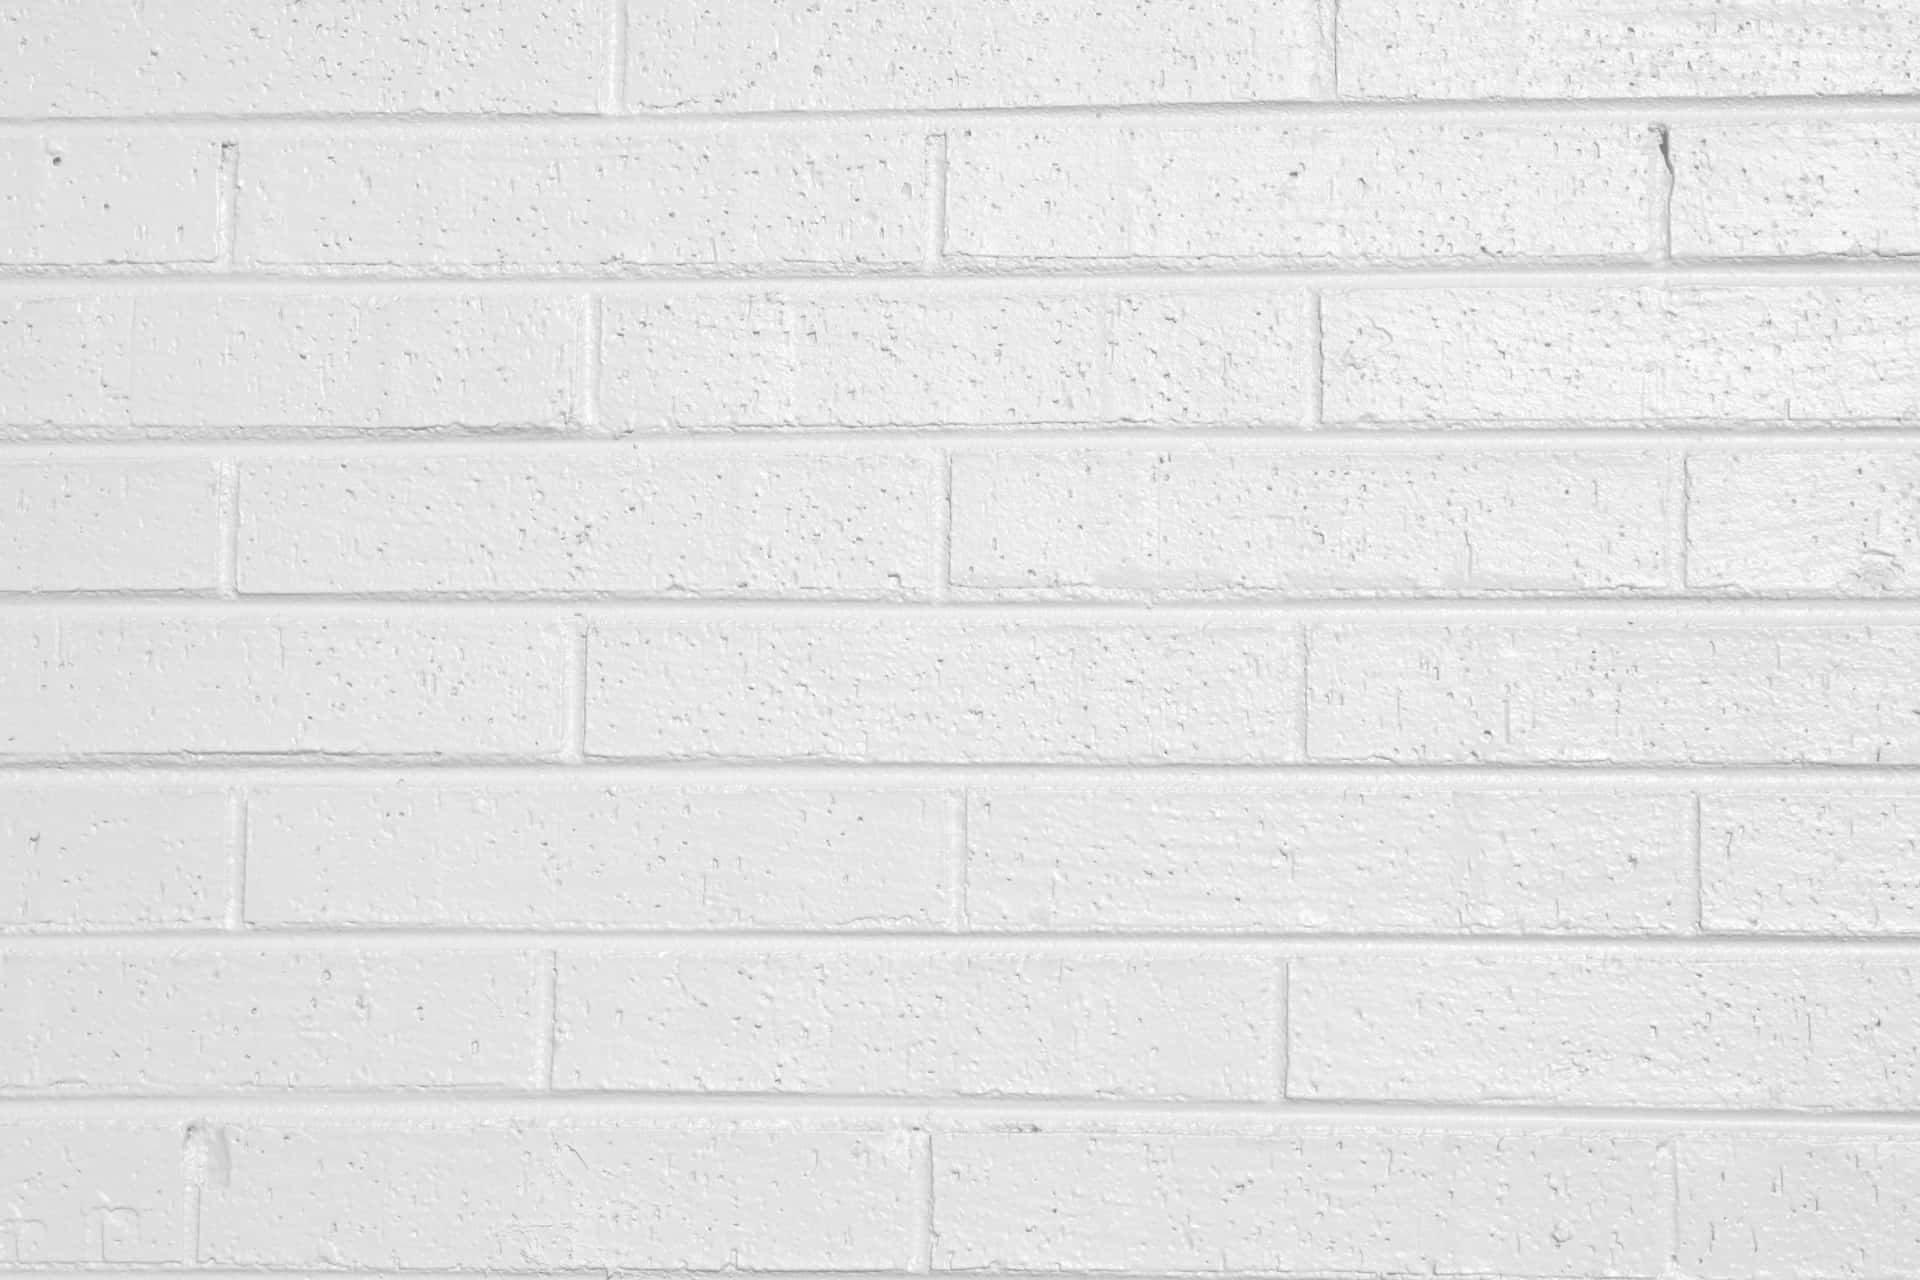 "Textured white brick wall provides a classic backdrop for any design"